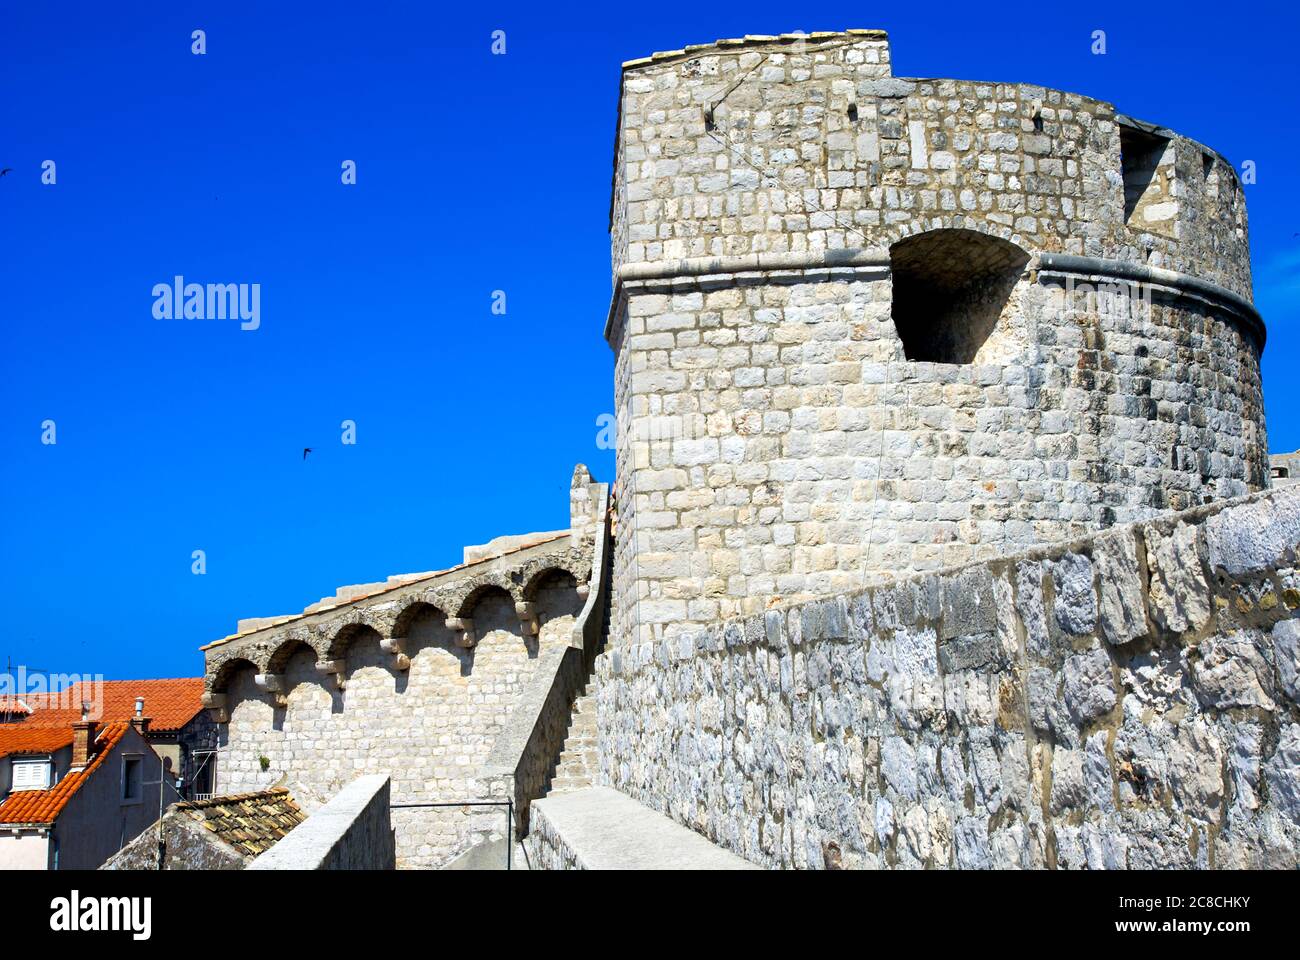 Croatia, Dubrovnik, the Walled Old City the old fort Stock Photo